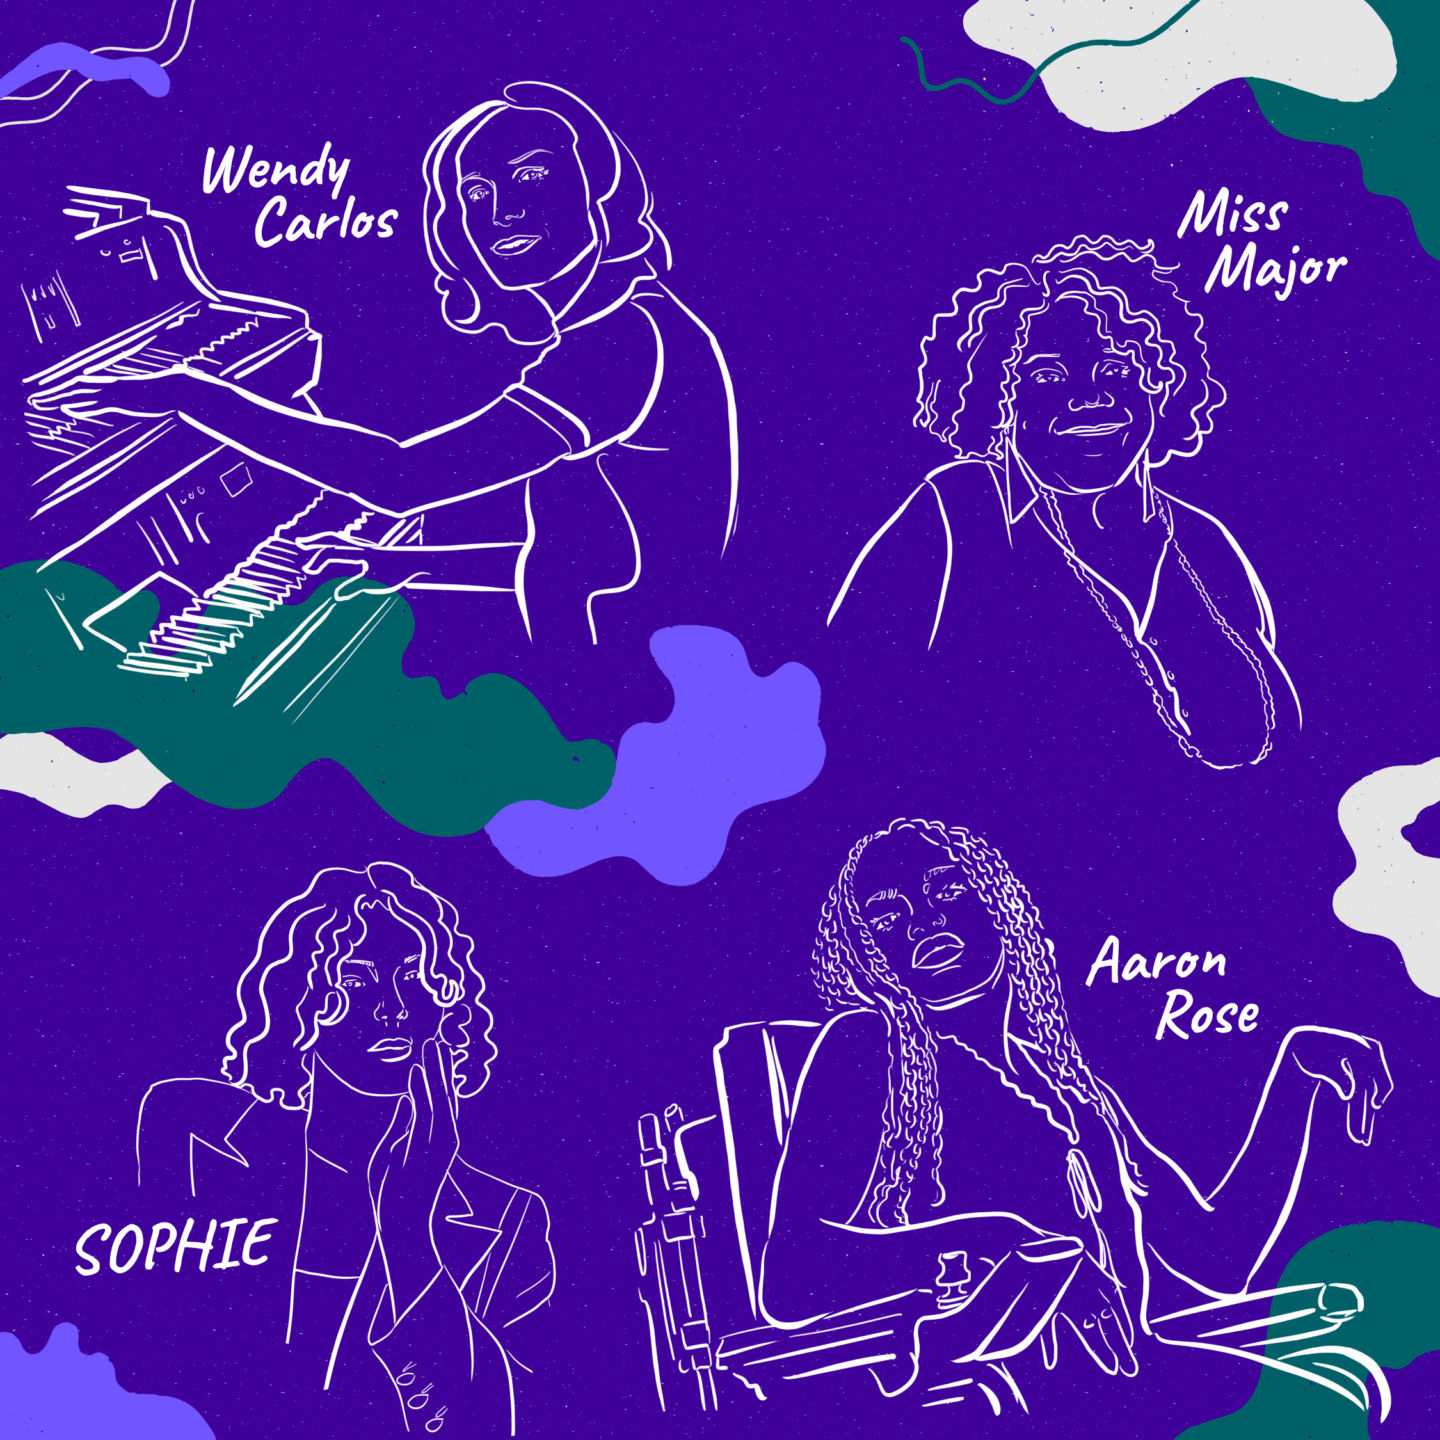 Illustration featuring Wendy Carlos, Miss Major, SOPHIE, and Aaron Rose